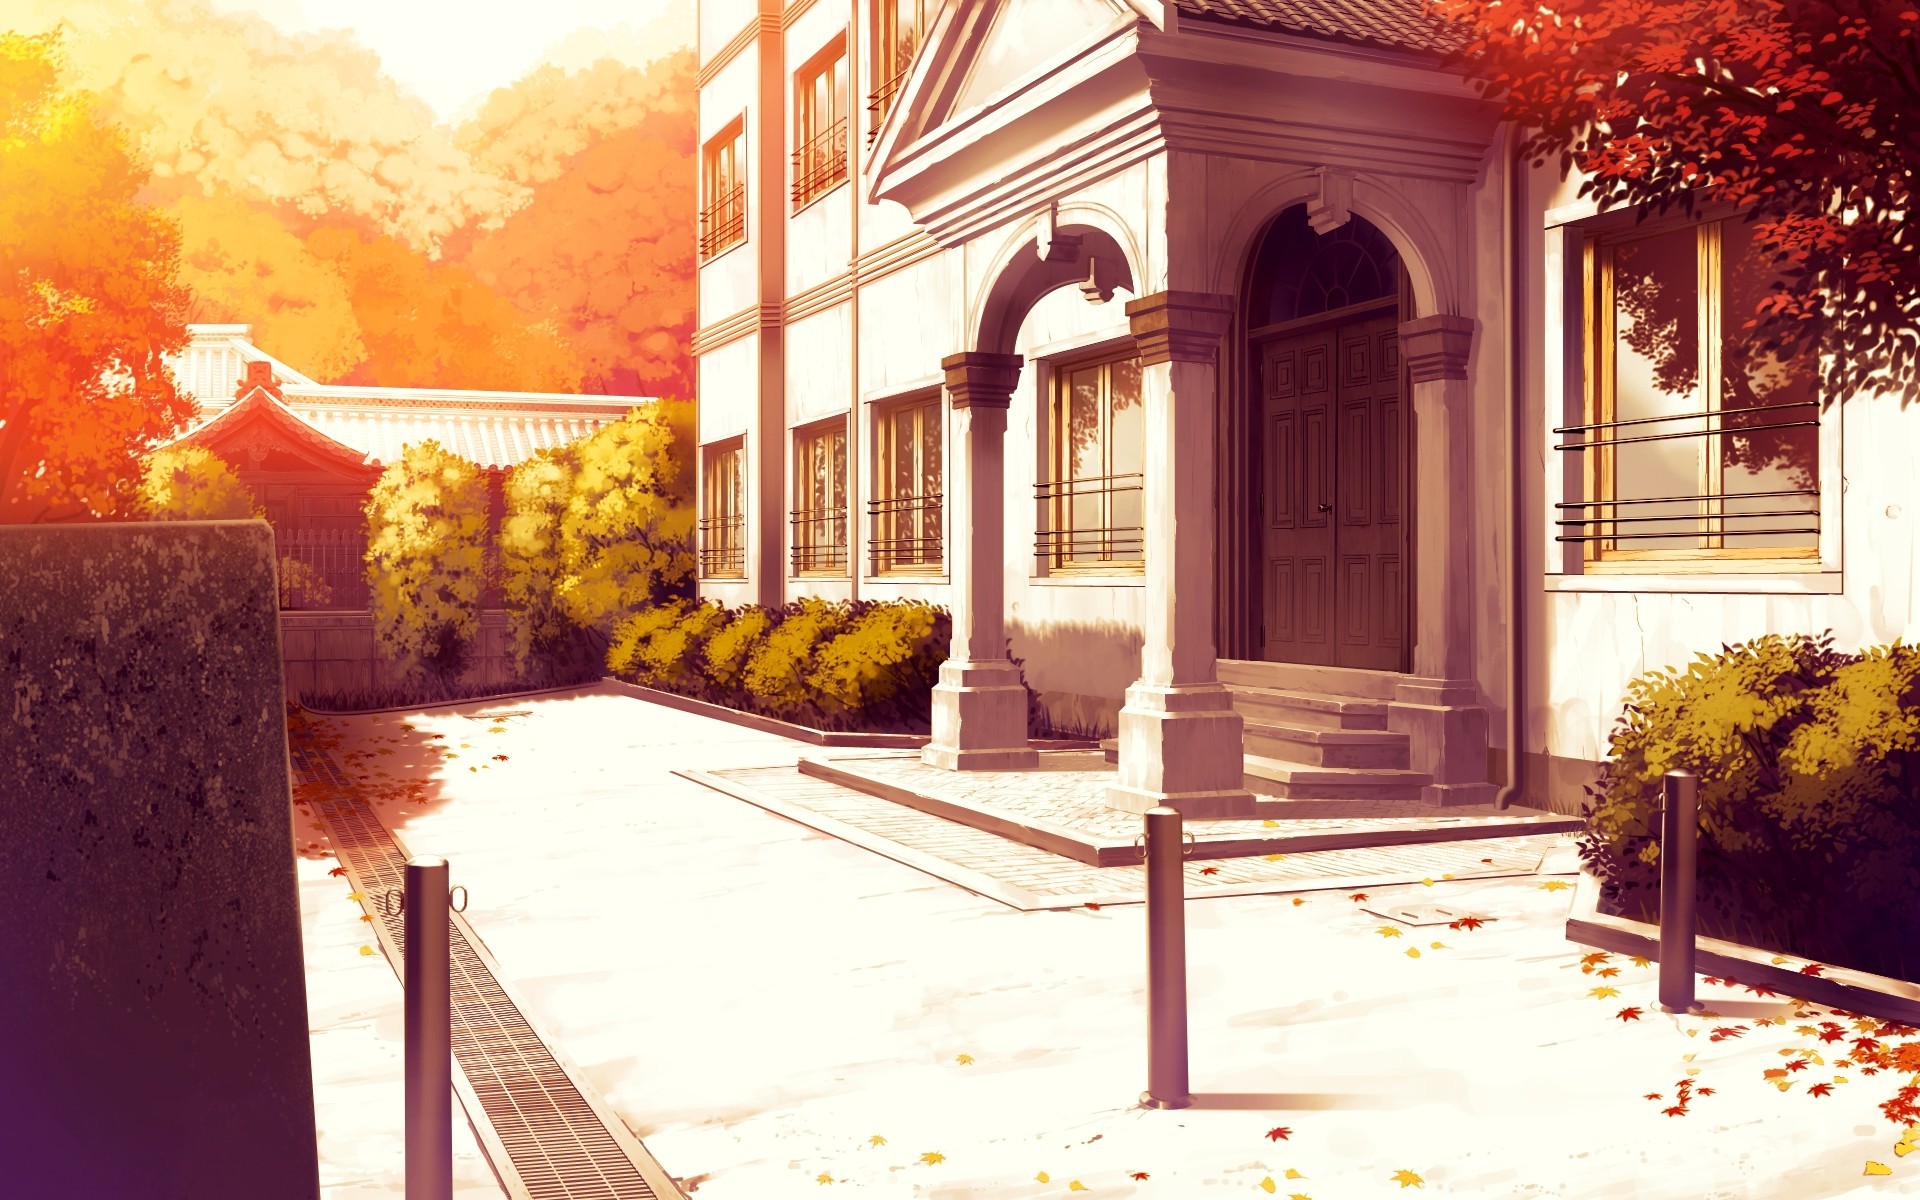 Anime 1920x1200 drawing anime building outdoors sunlight